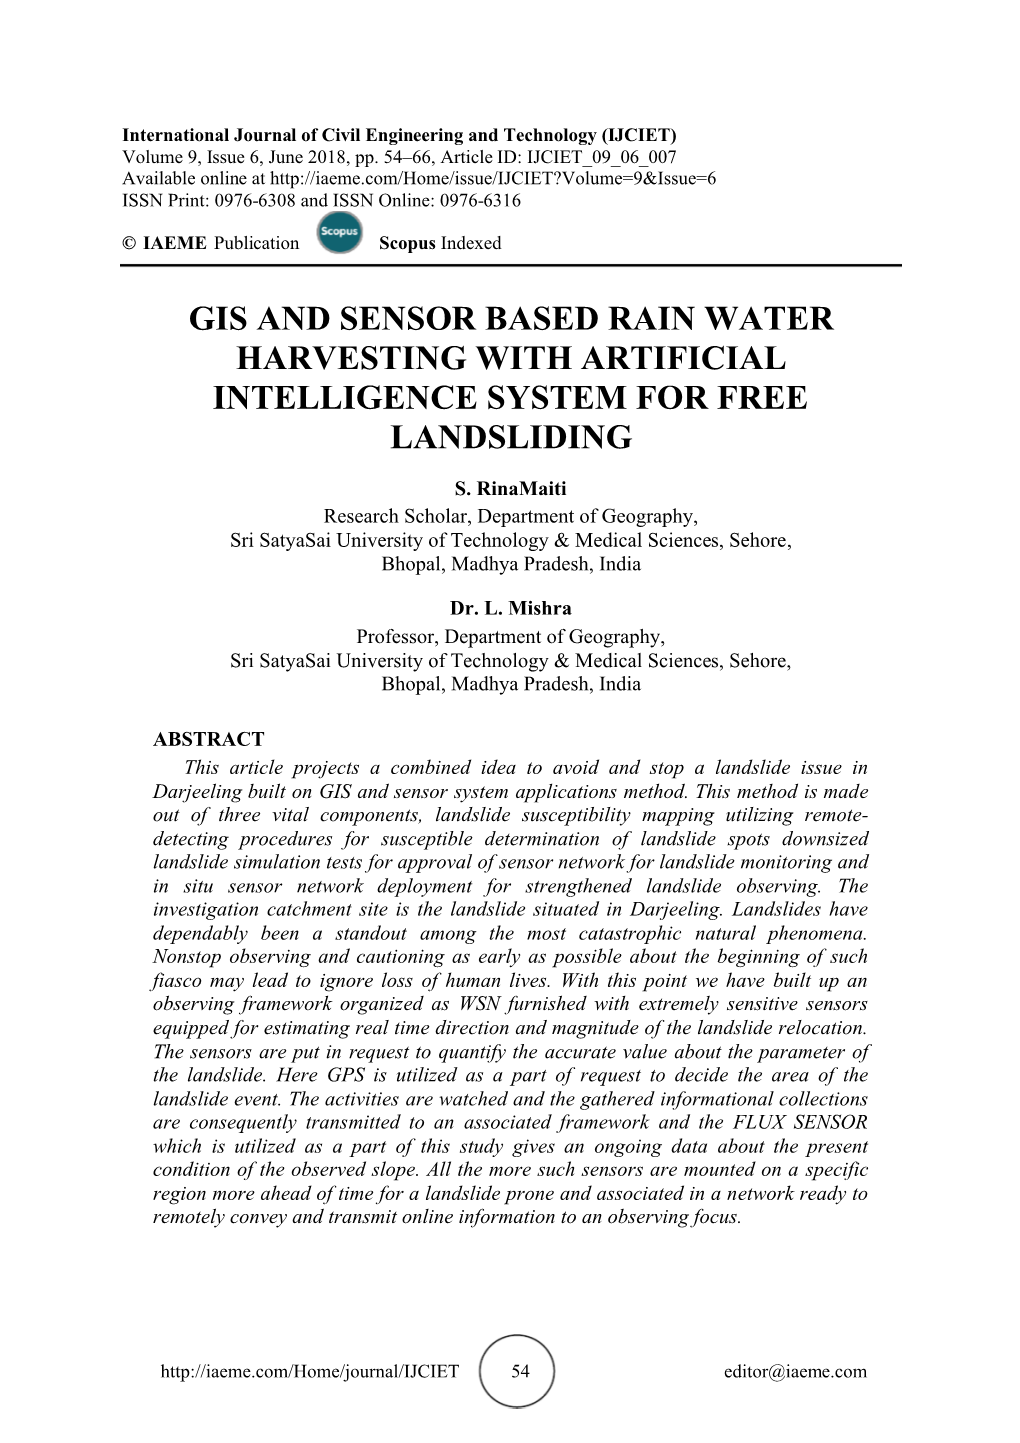 Gis and Sensor Based Rain Water Harvesting with Artificial Intelligence System for Free Landsliding